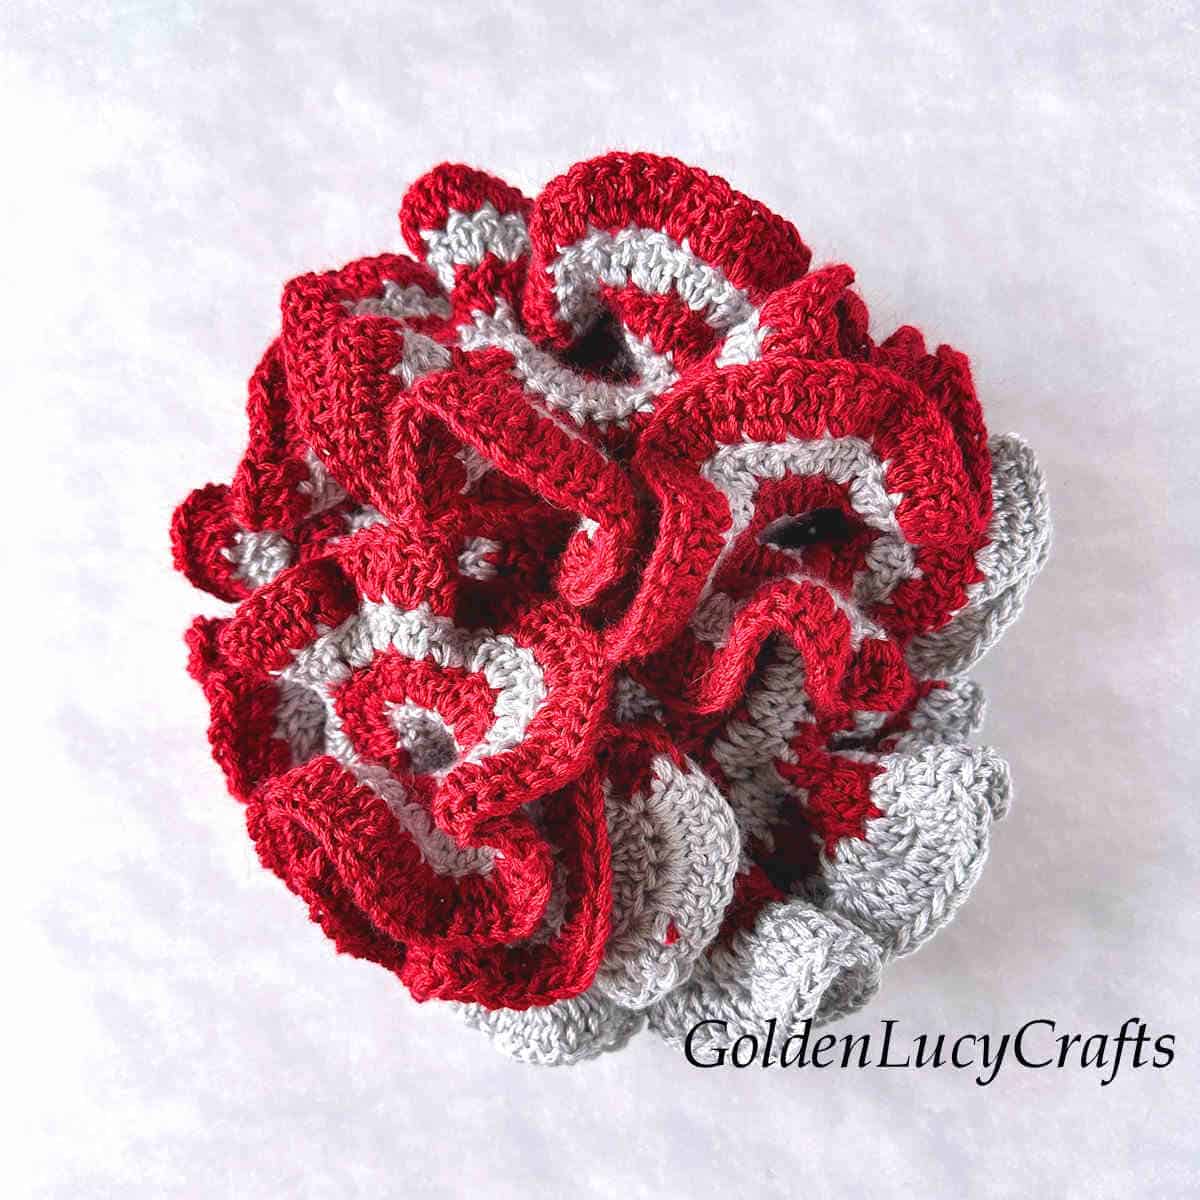 Crocheted hyperbolic coral in grey and red colors.